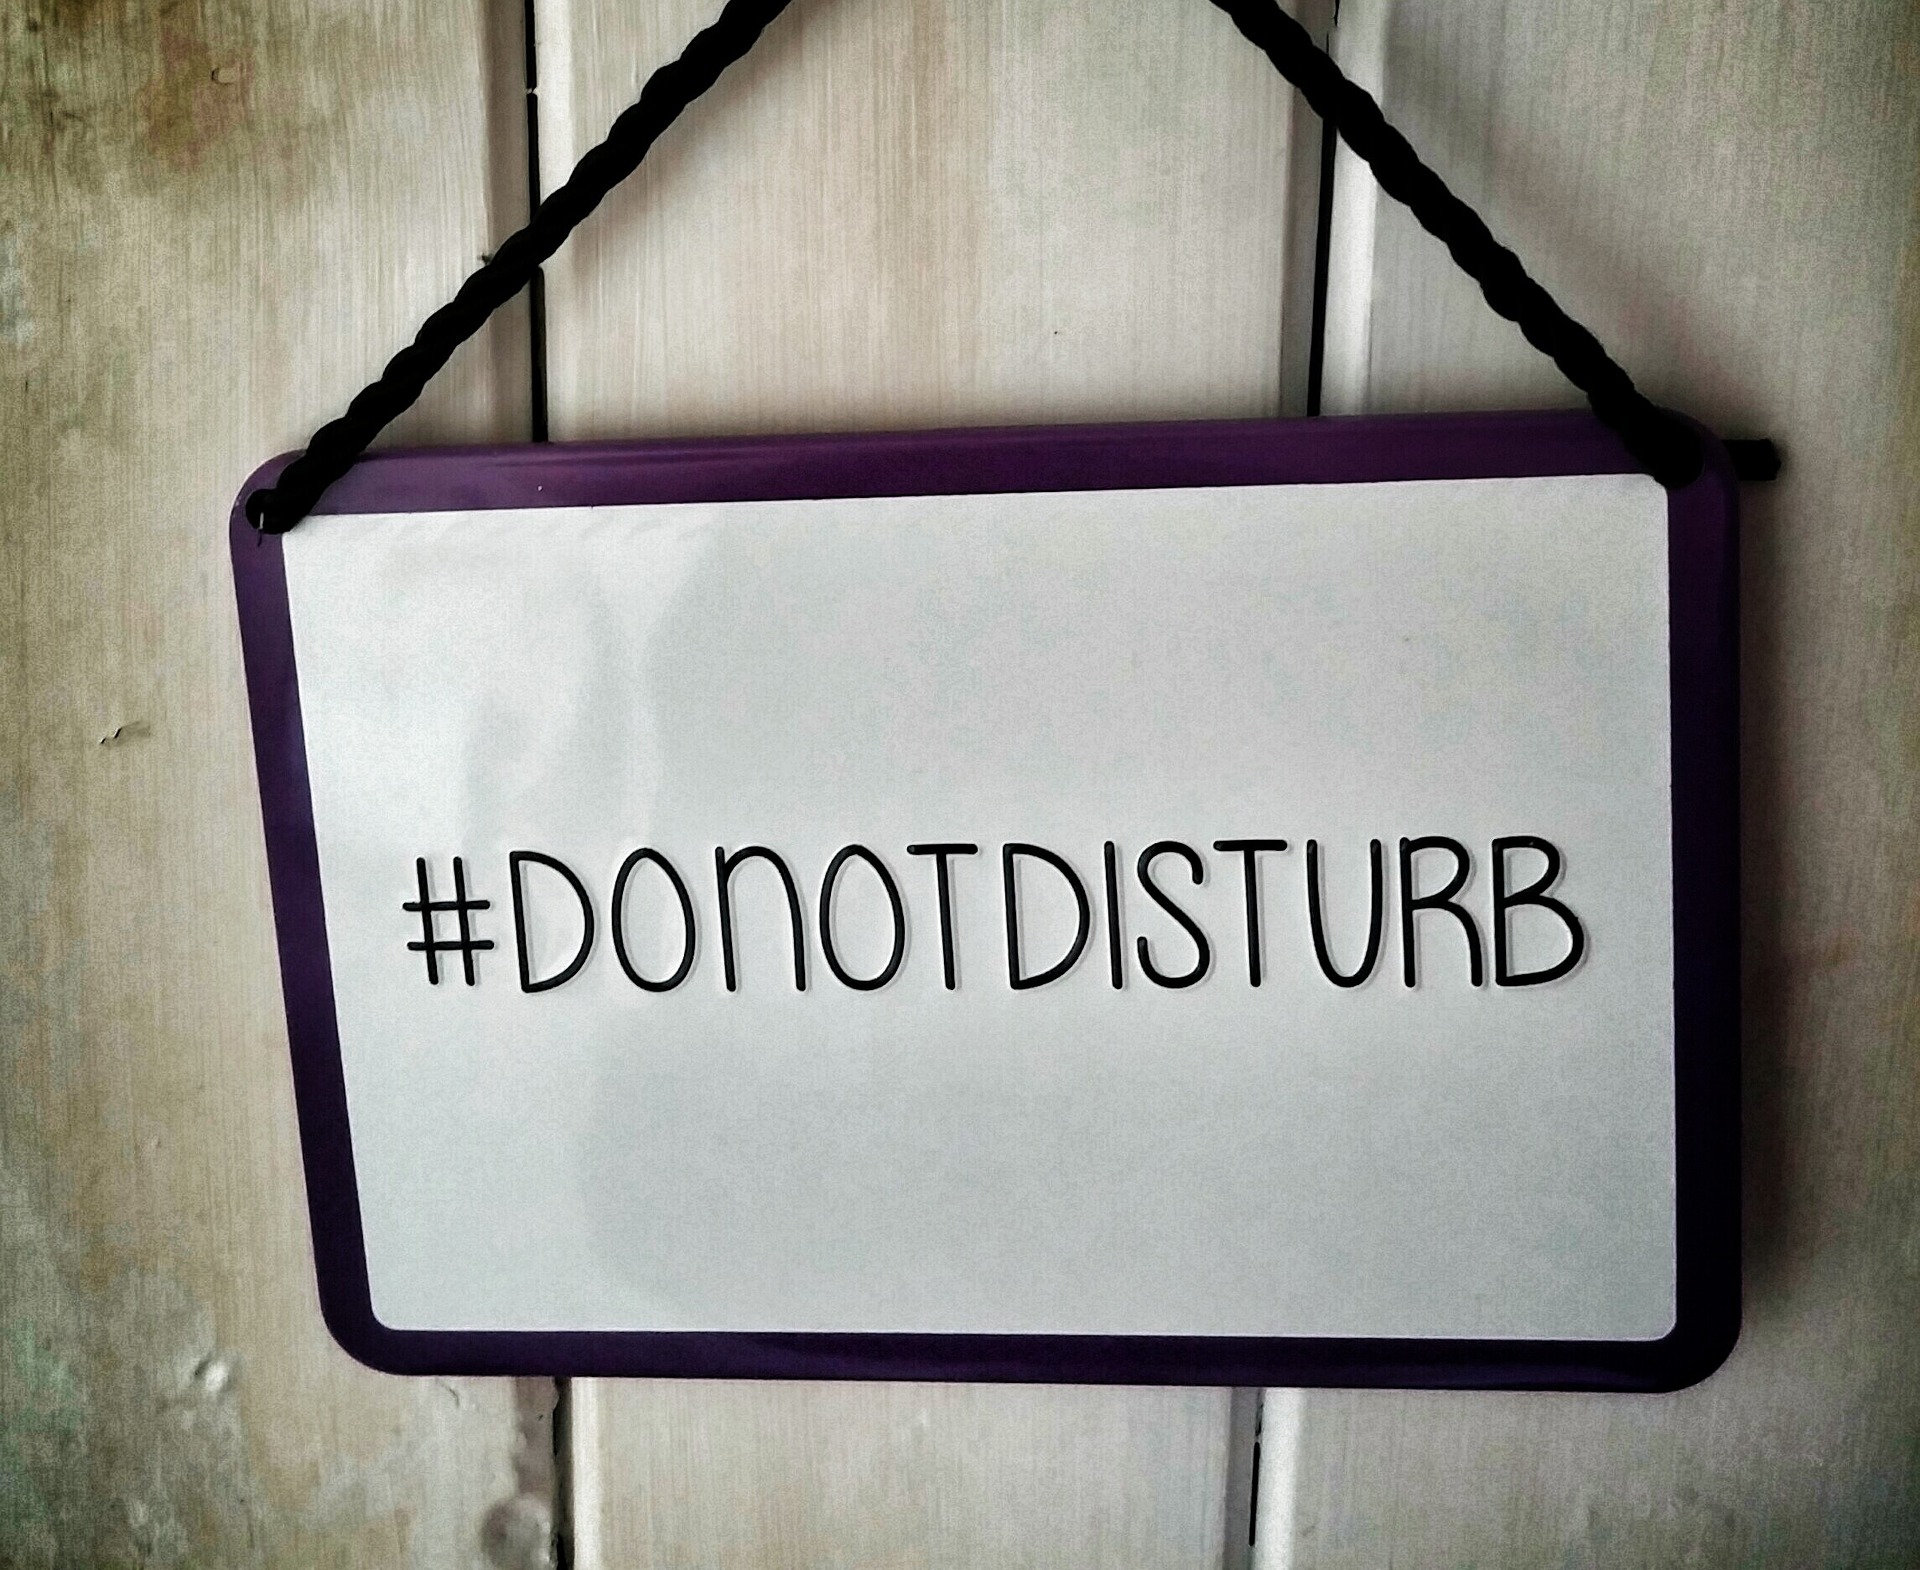 A do not disturb sign setting boundaries for being productive 